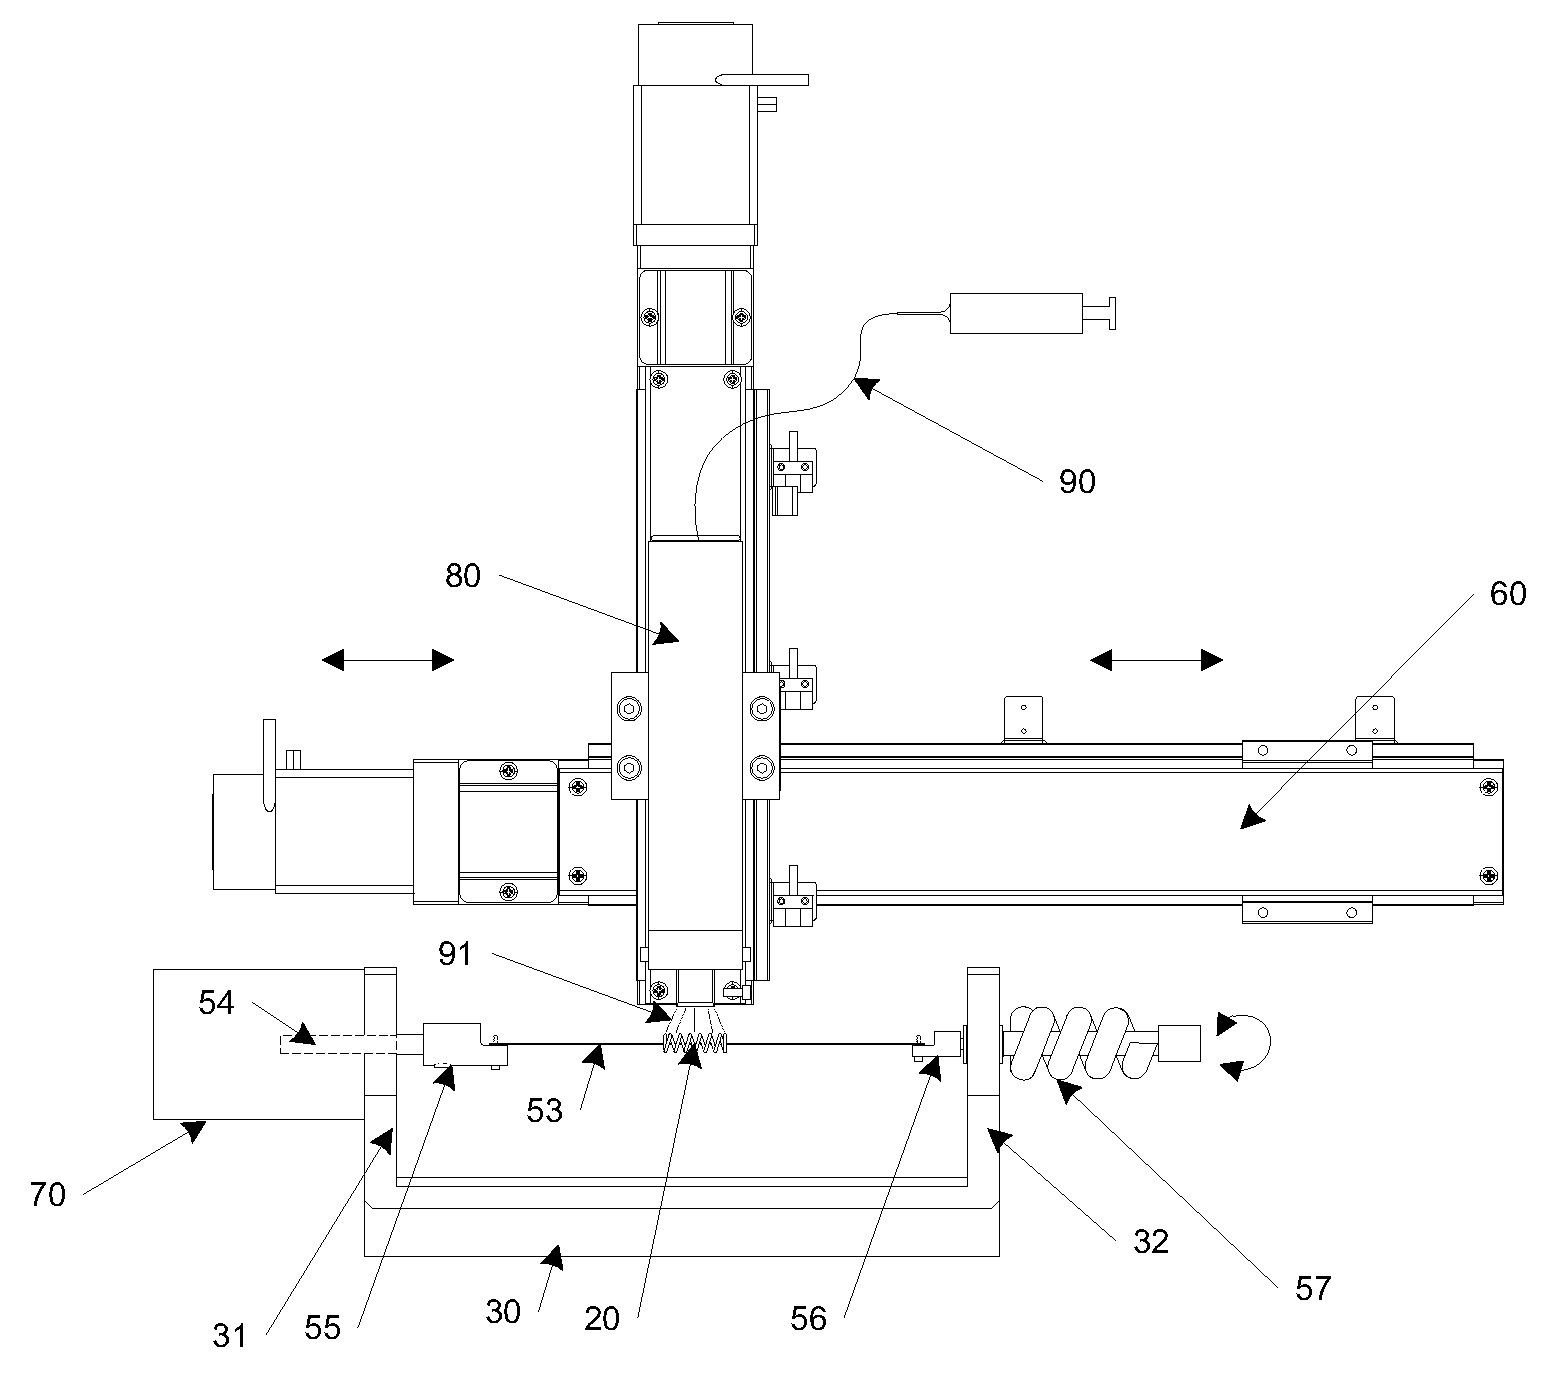 Apparatus for Holding a Medical Device During Coating